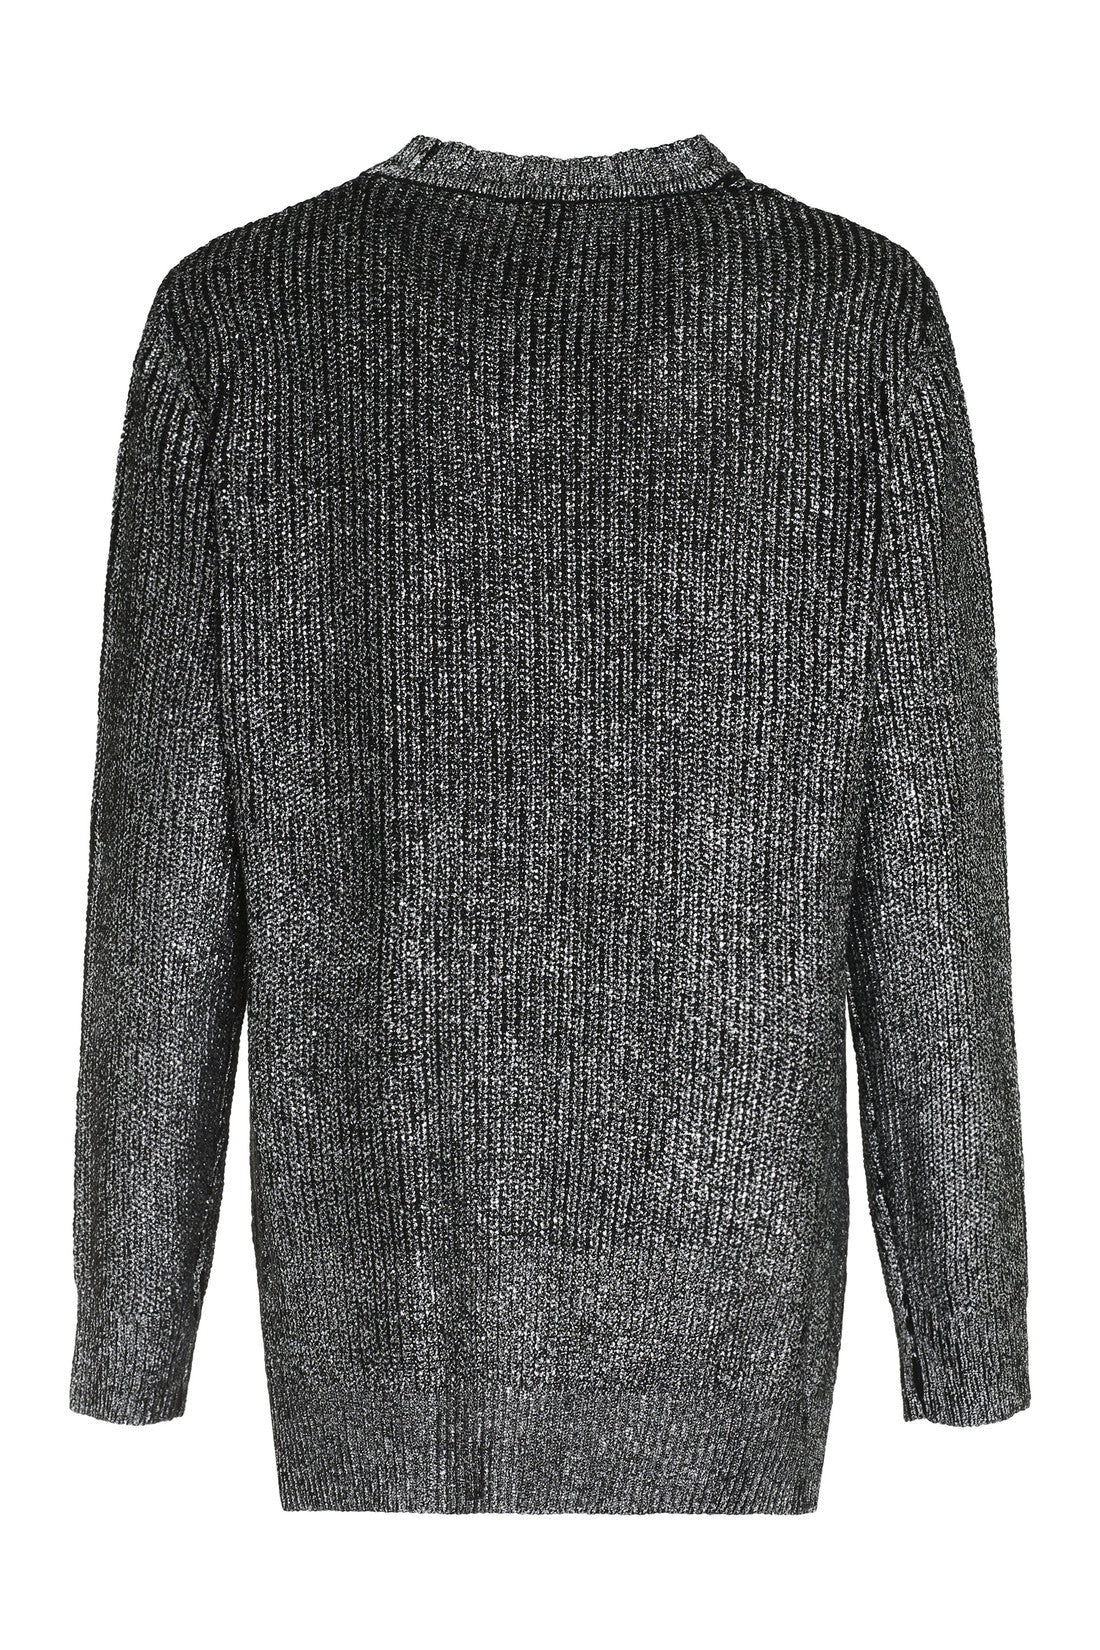 Pinko-OUTLET-SALE-Piranha ribbed sweater-ARCHIVIST